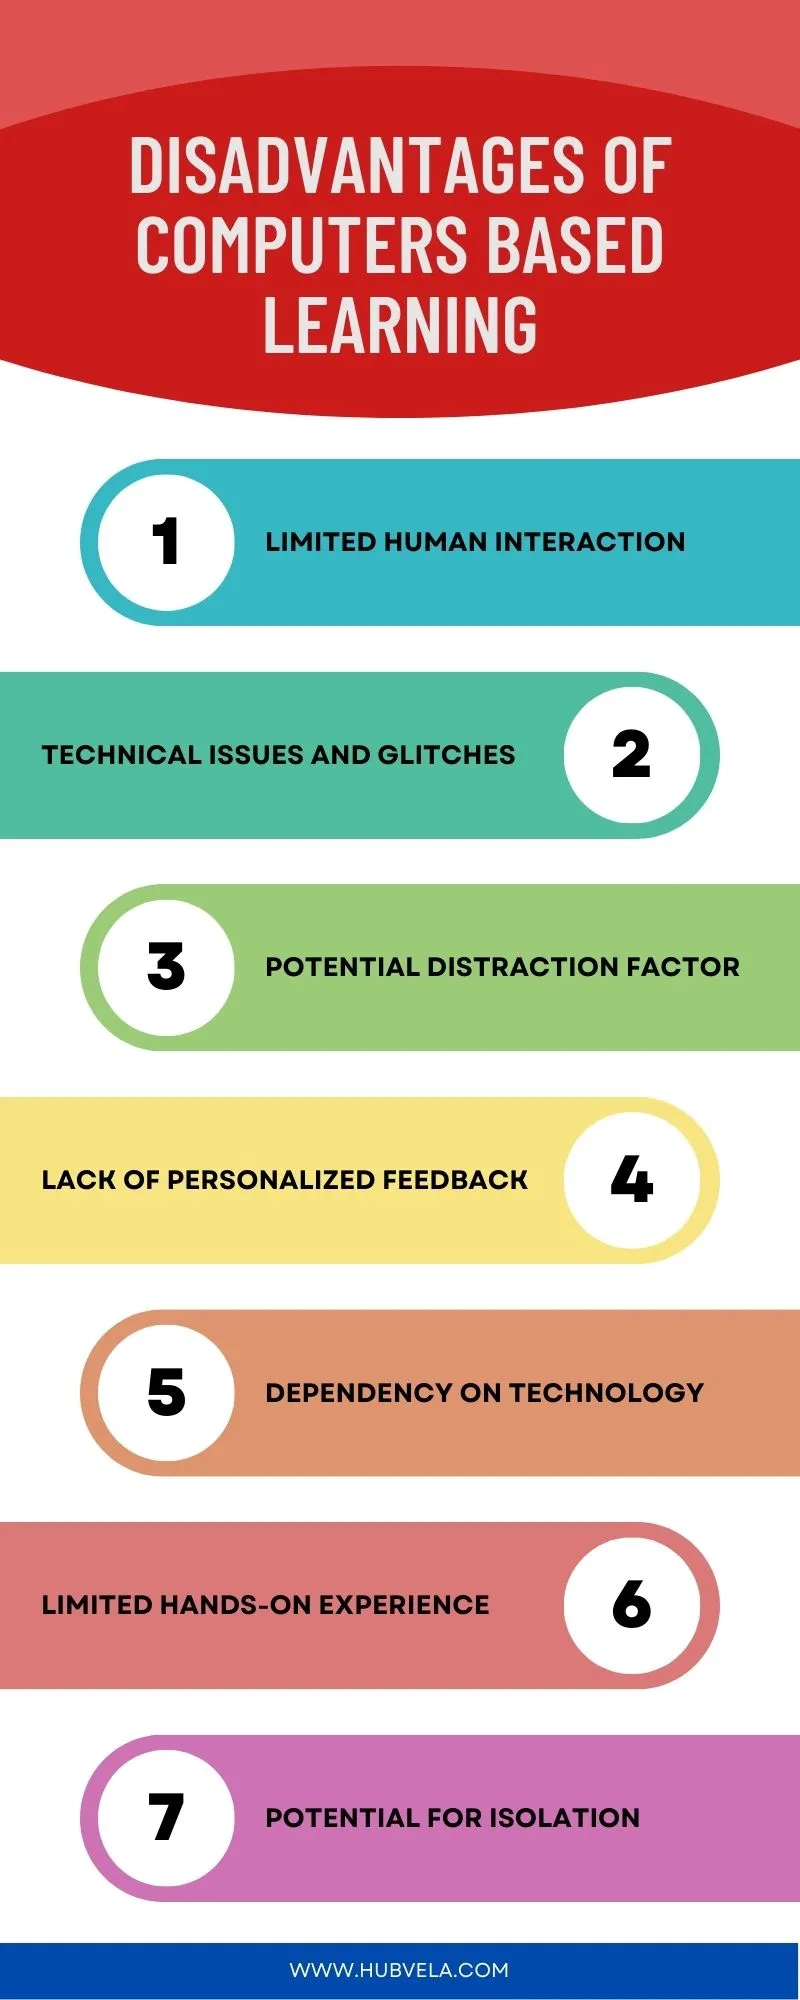 Disadvantages of Computers Based Learning Infographic